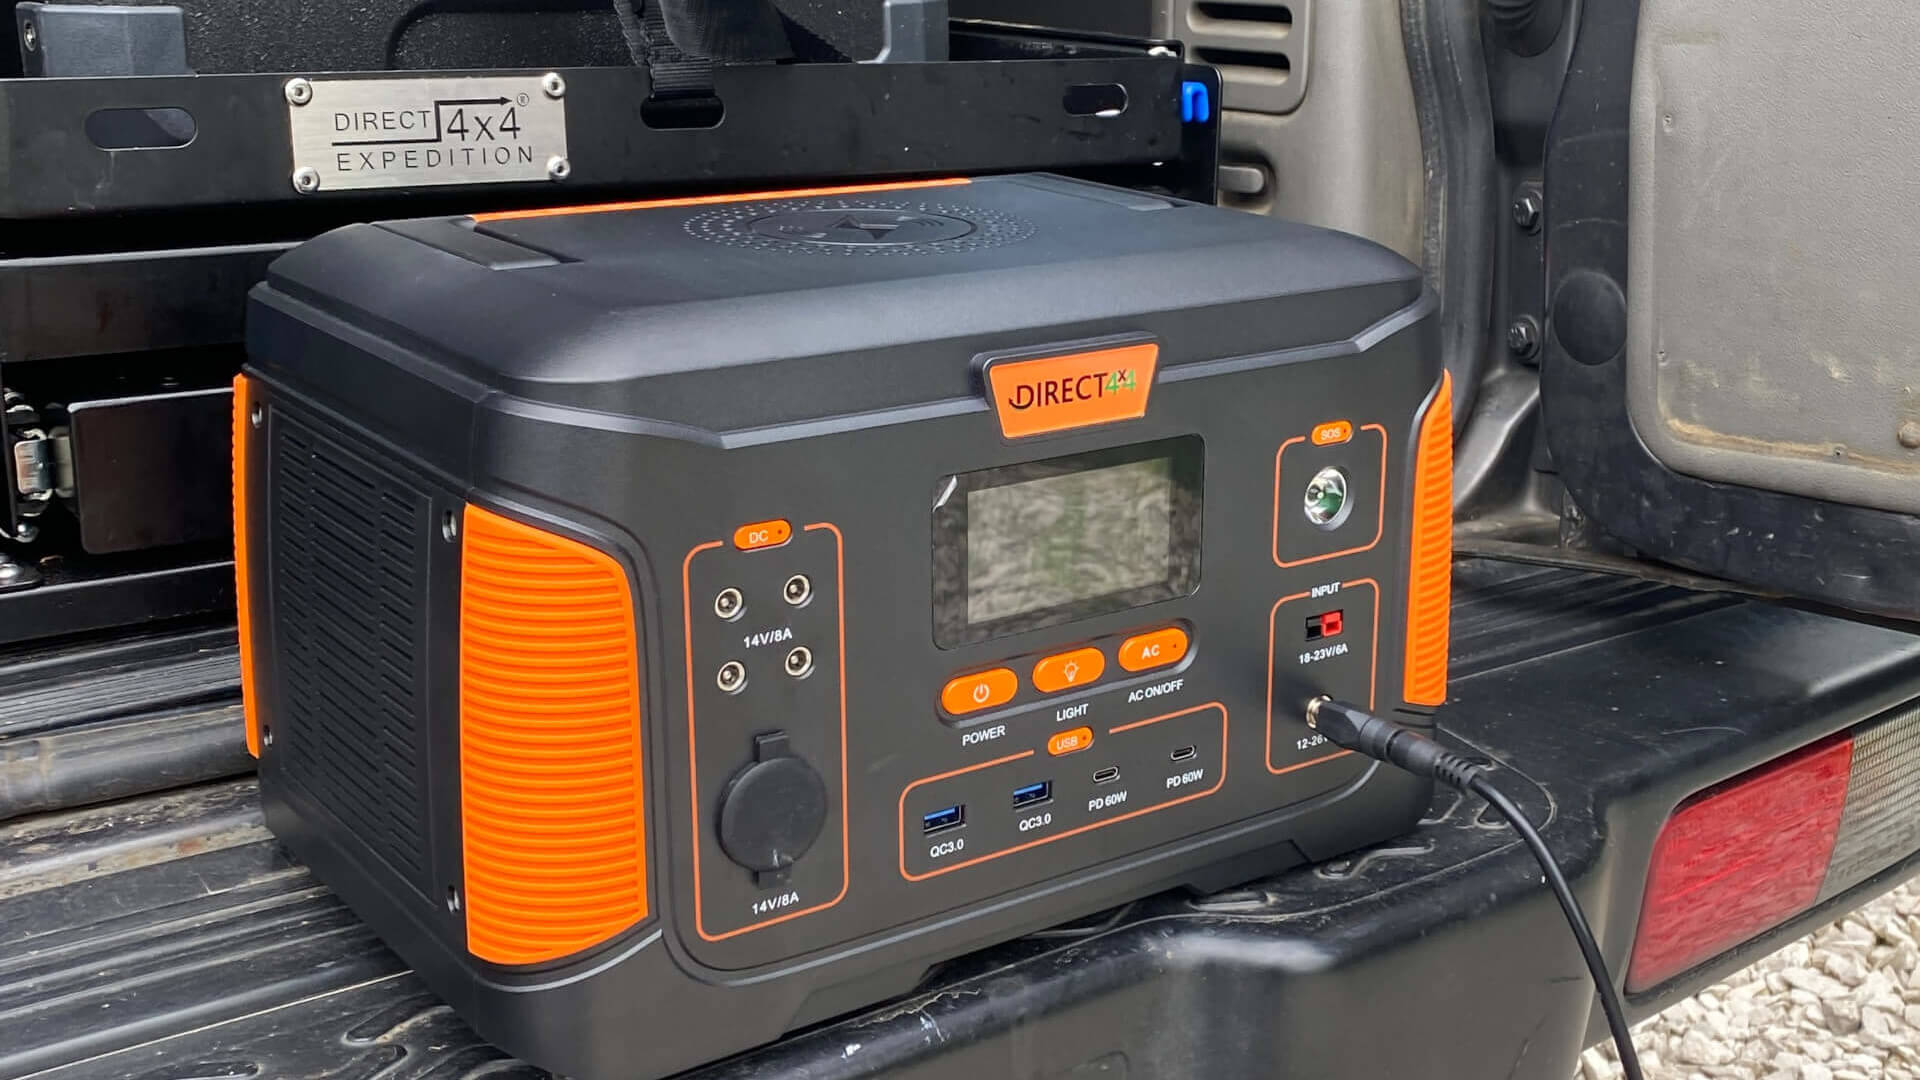 Photo of a Direct4x4 multifunction outdoor power charging station on the back of an offroad 4x4 vehicle.